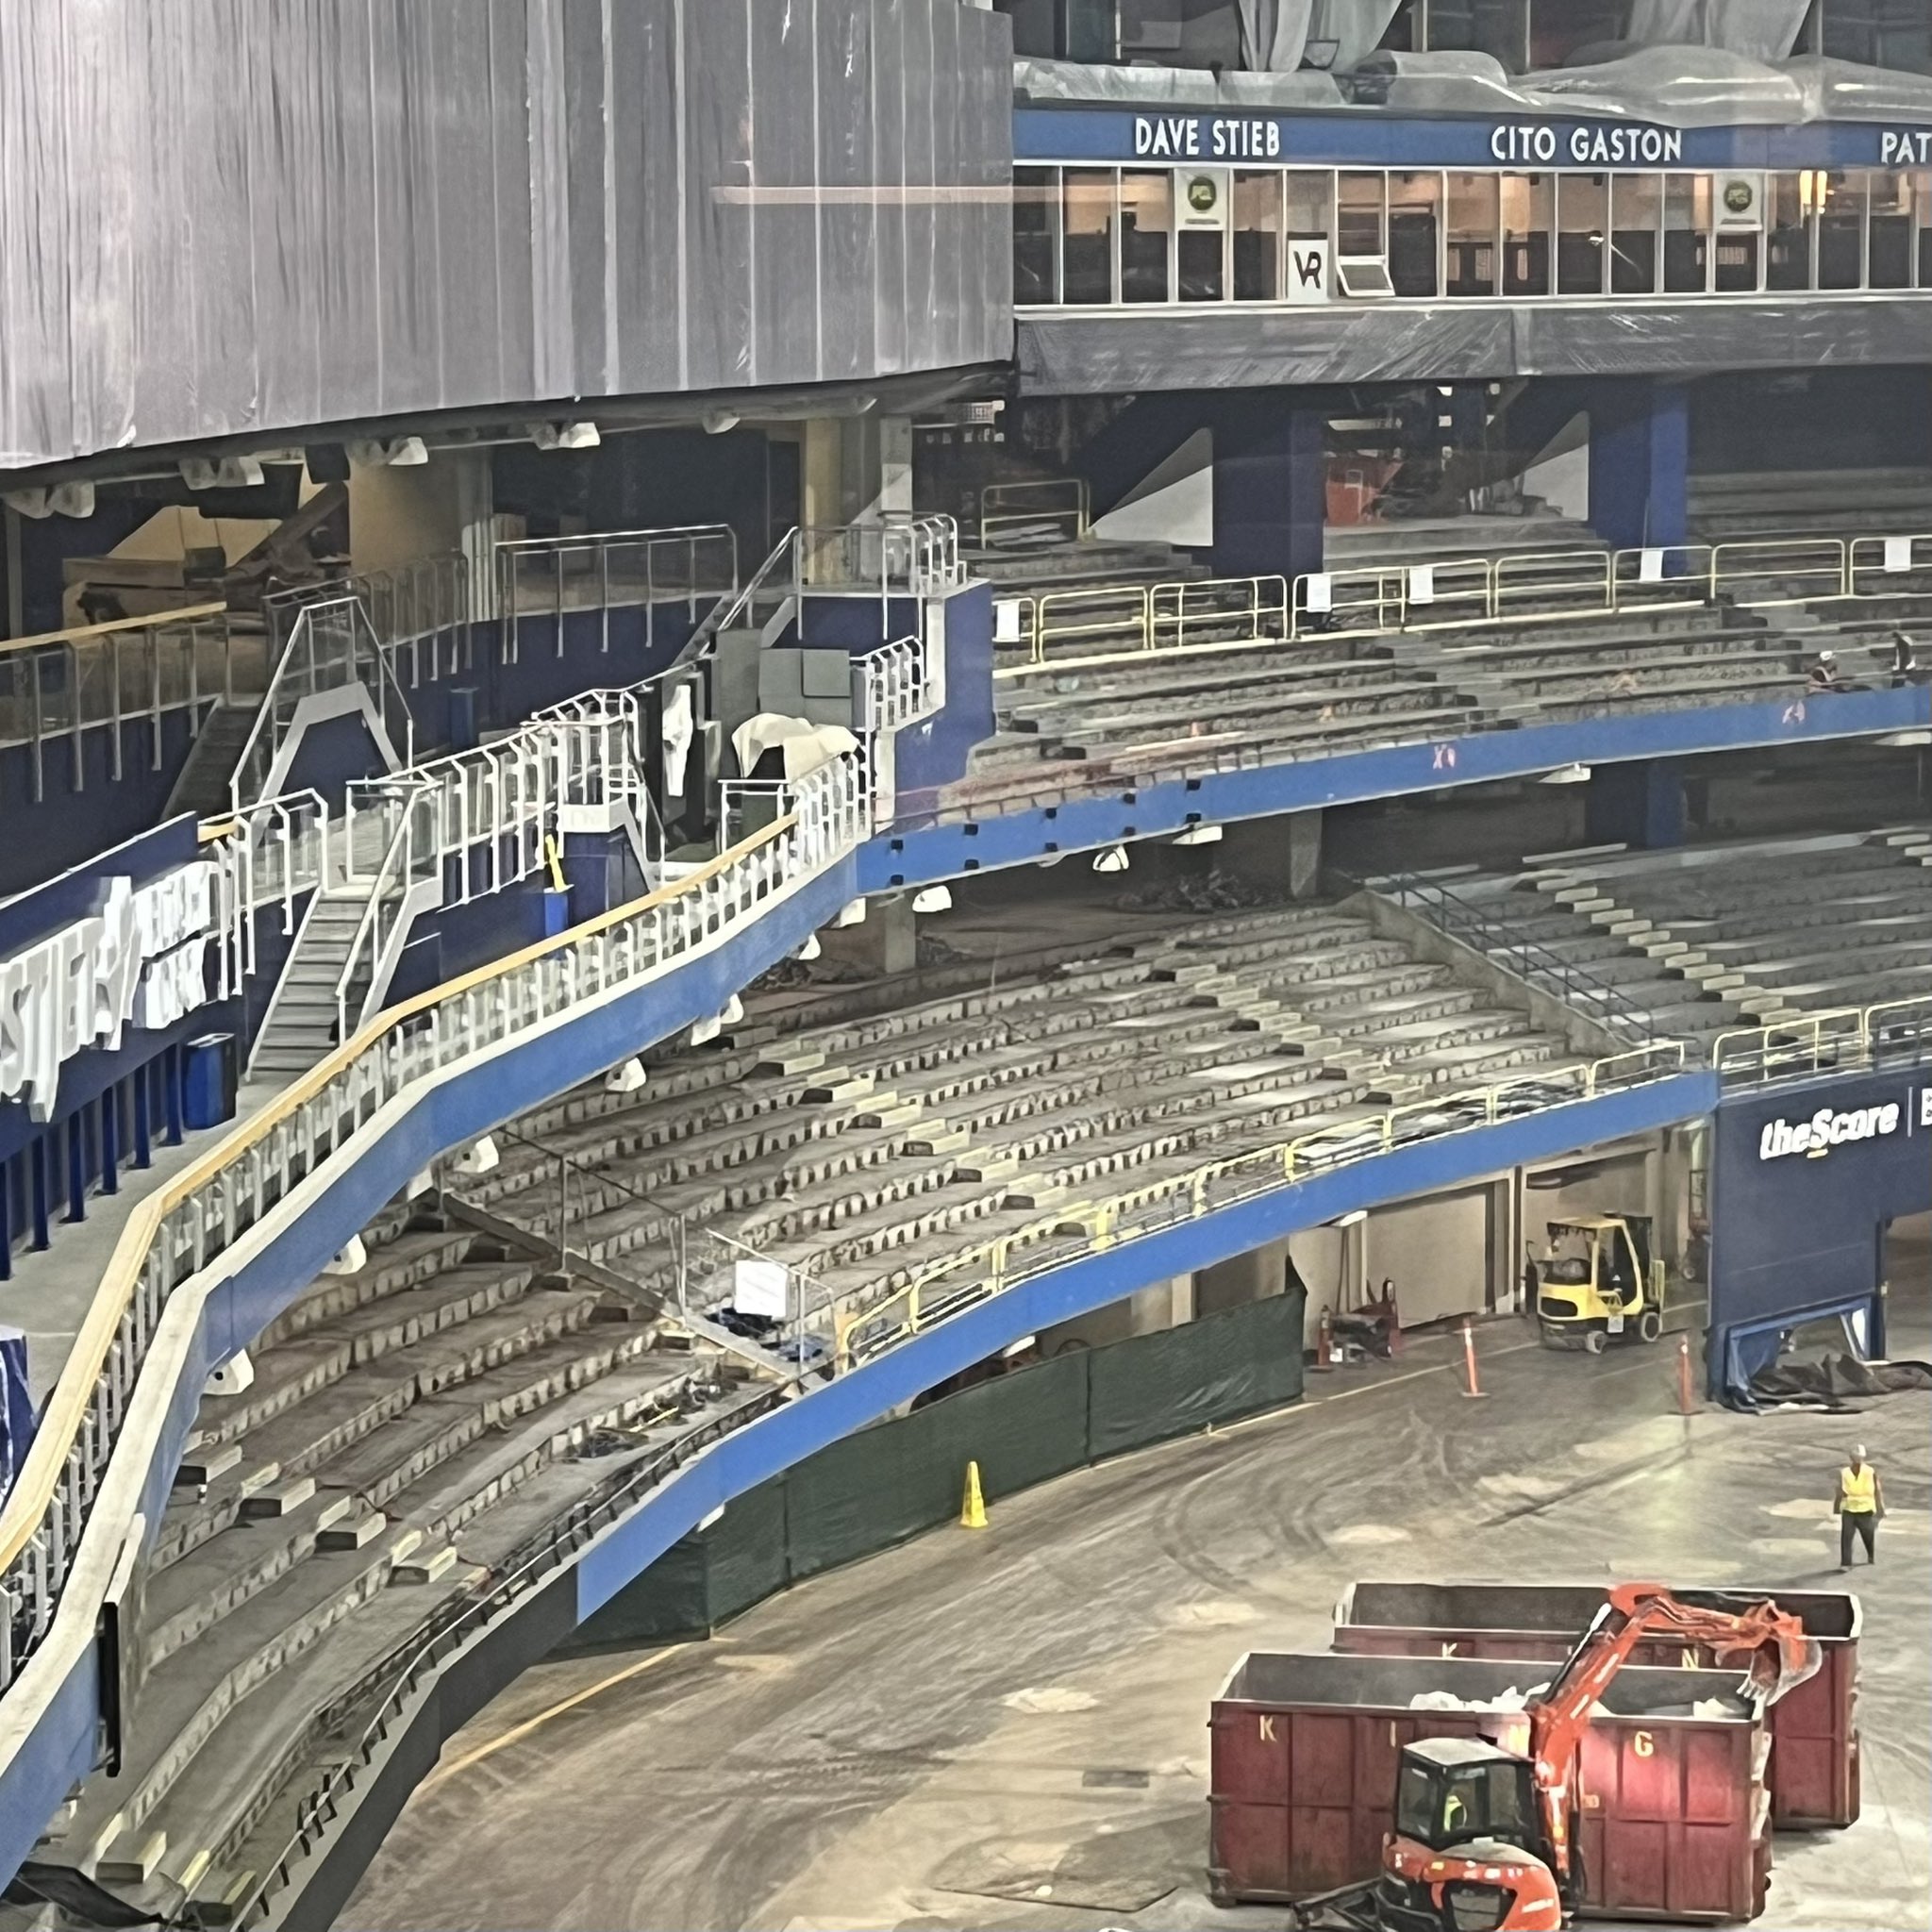 TBJ Live on X: THREAD: The Rogers Centre makeover is well underway. Here's  what has been happening since the Blue Jays season ended: 🔹 Entire 500  Level & 100/200 Level Outfield seats